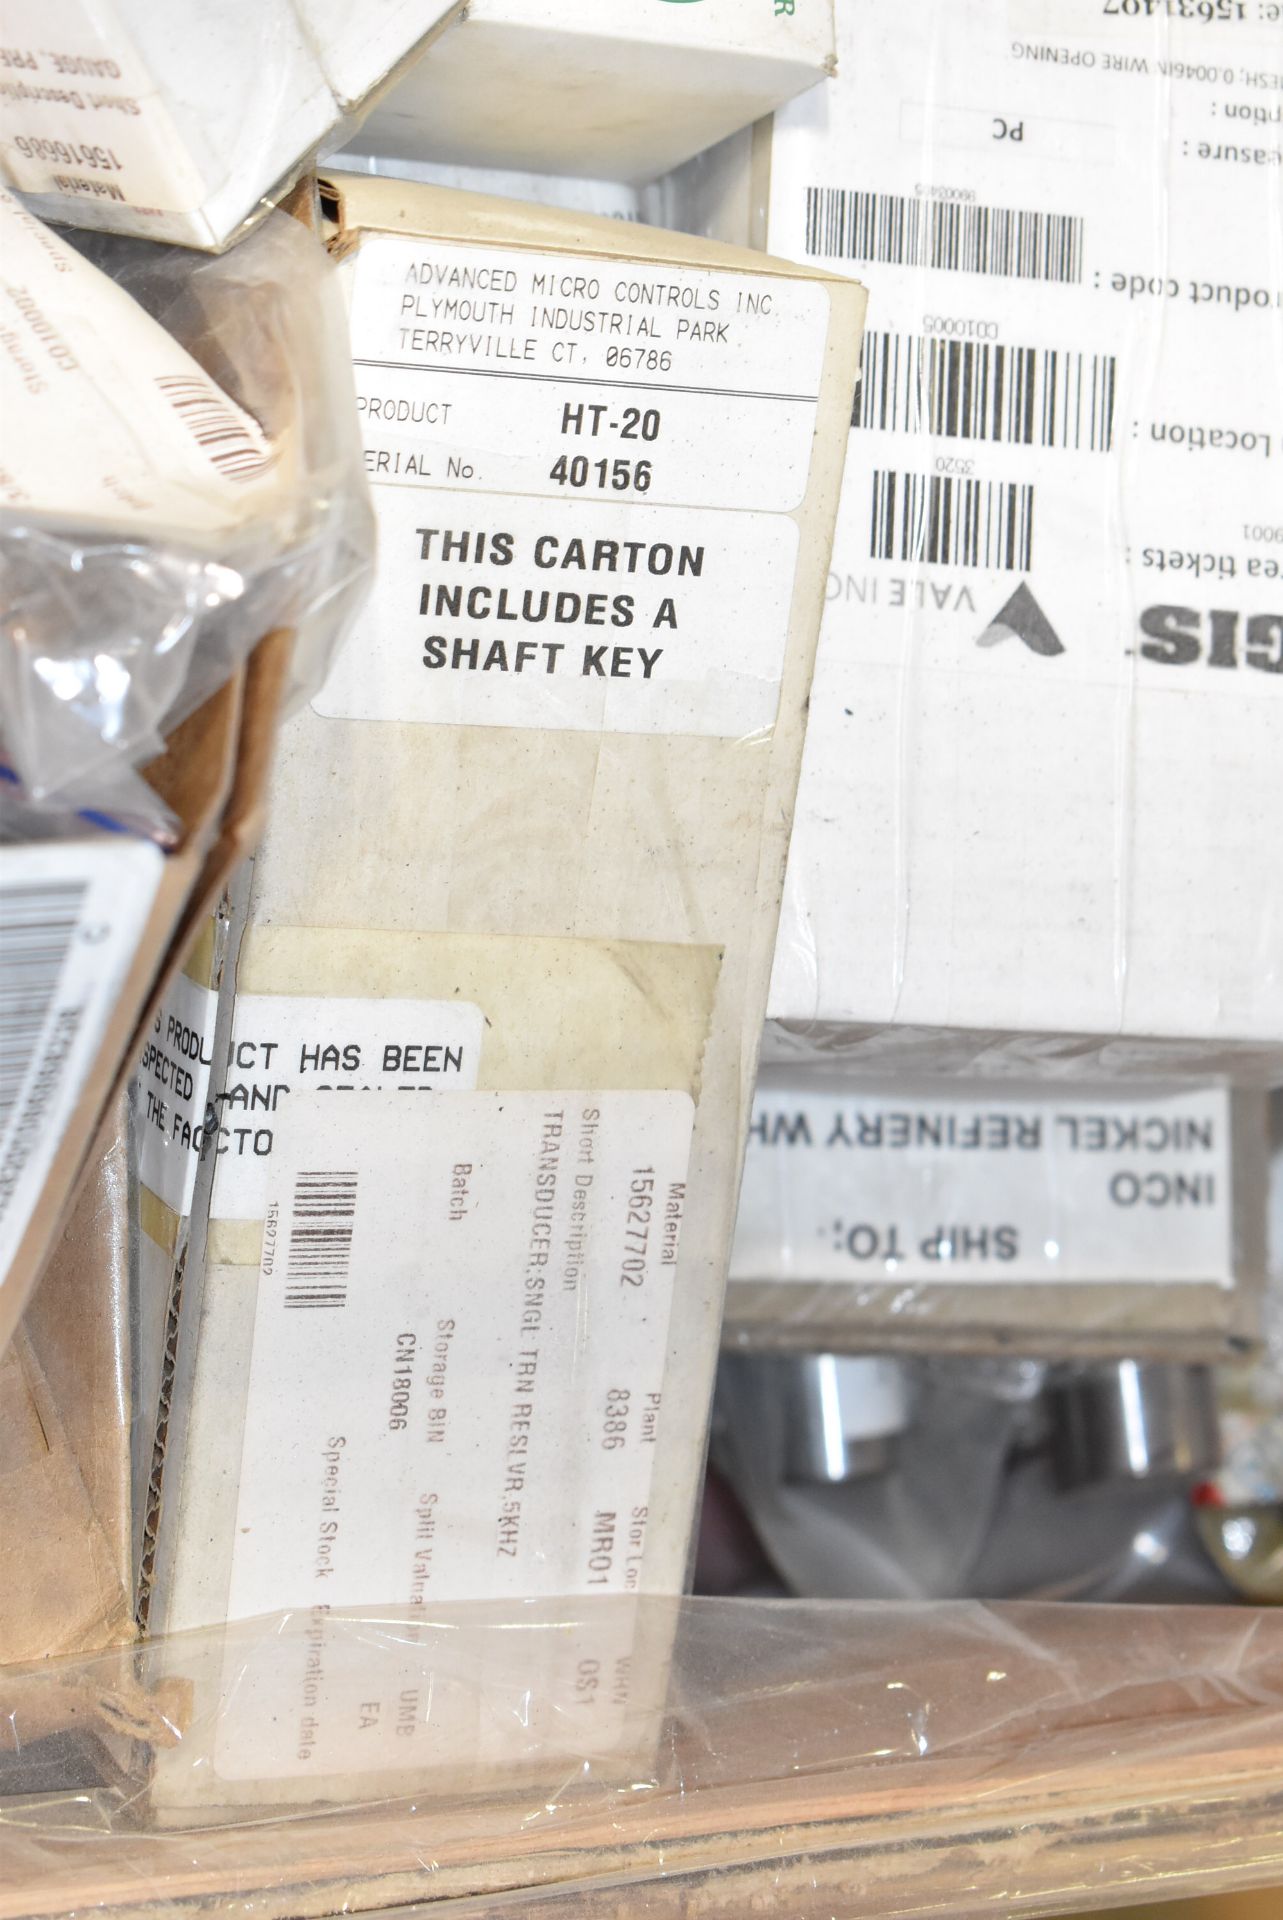 LOT/ CRATE OF SPARE PARTS CONSISTING OF FLANGES, GATE VALVES, PRESSURE REGULATORS, RELAYS, BEARINGS, - Image 10 of 10